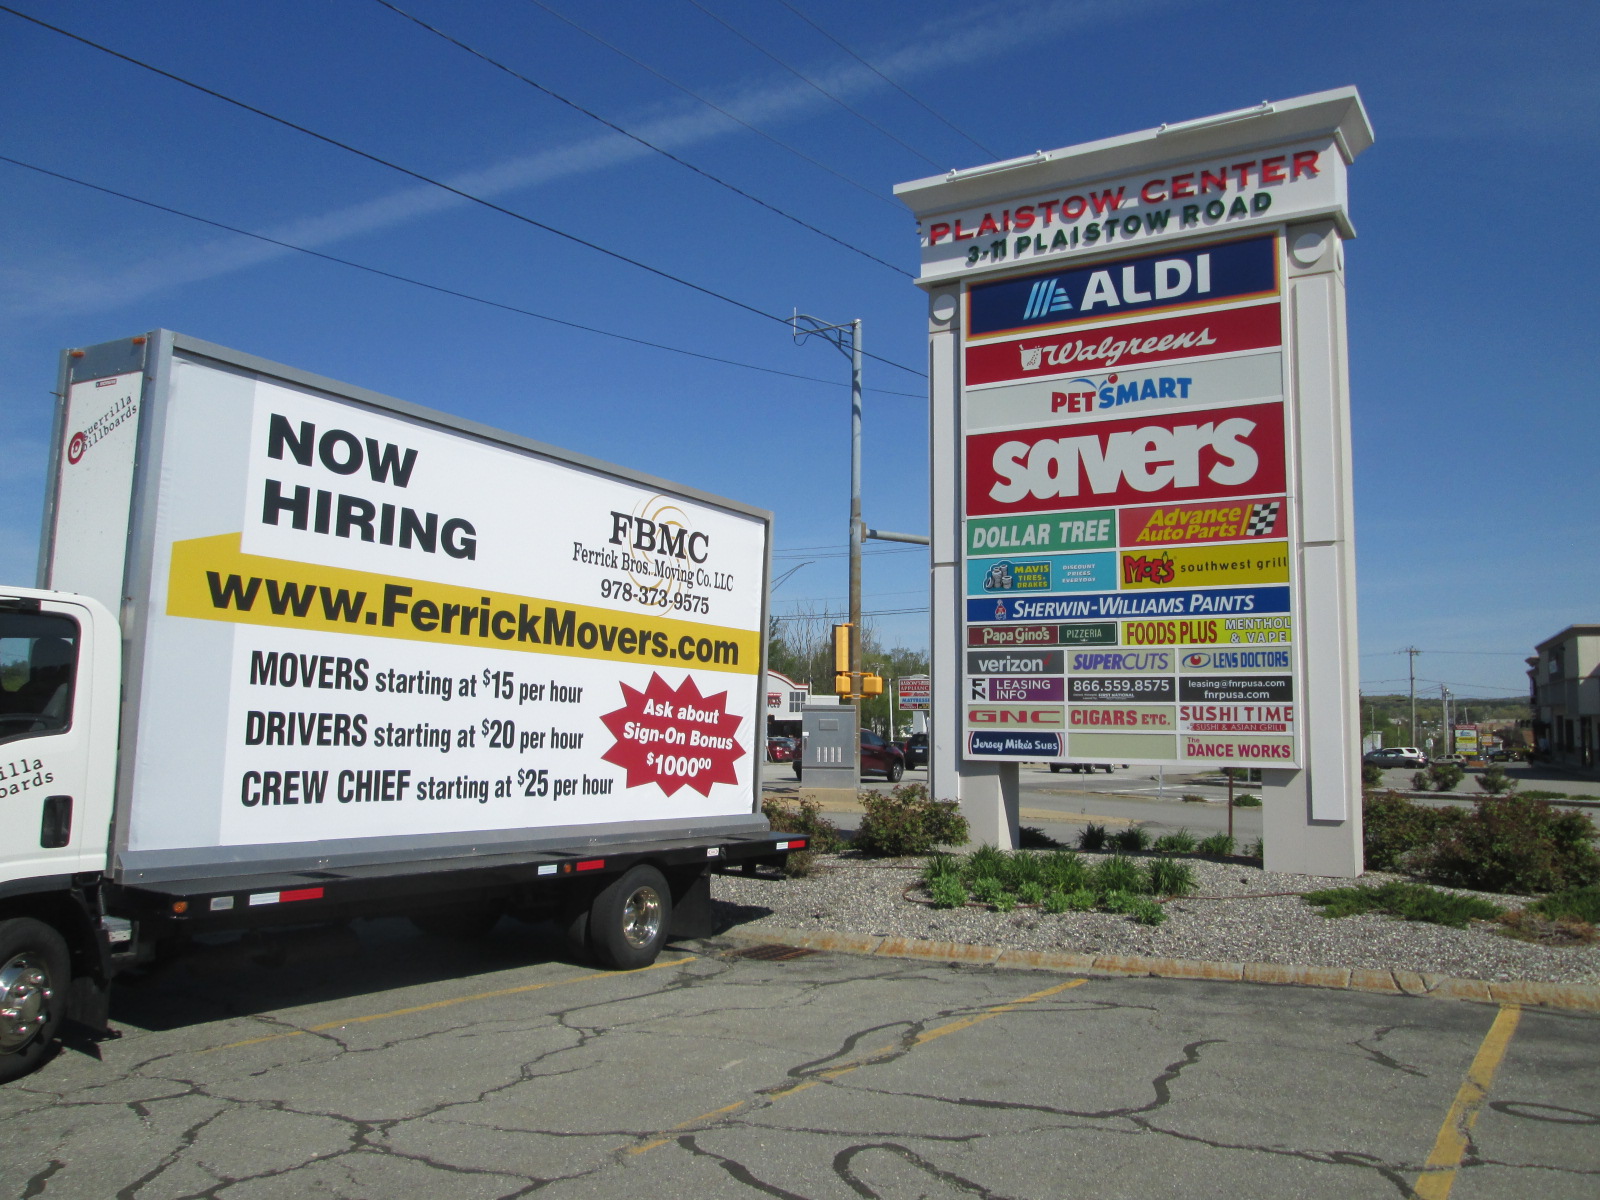 NOW HIRING mobile billboard ad in Plaistow NH